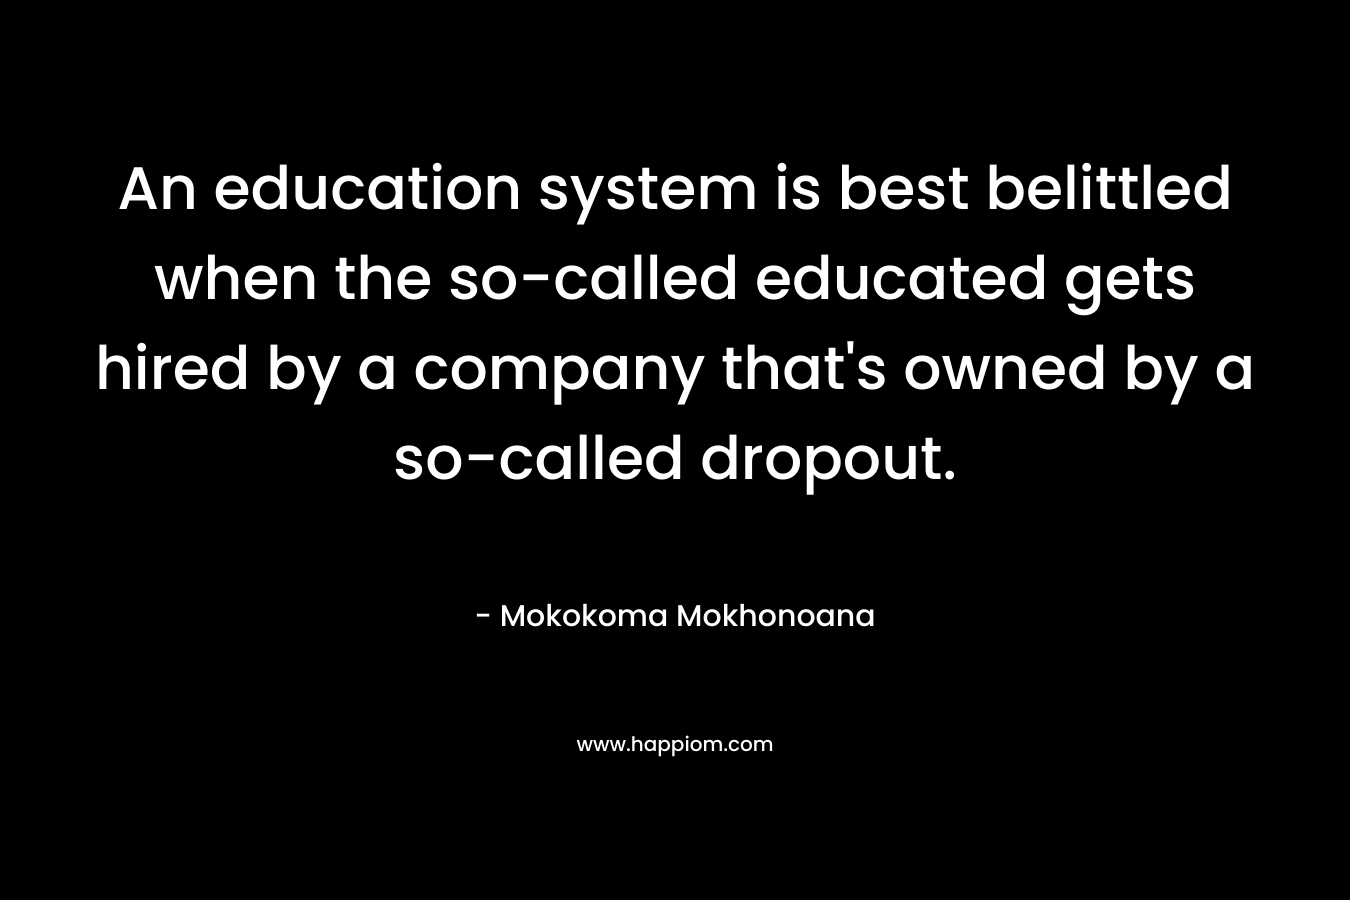 An education system is best belittled when the so-called educated gets hired by a company that's owned by a so-called dropout.